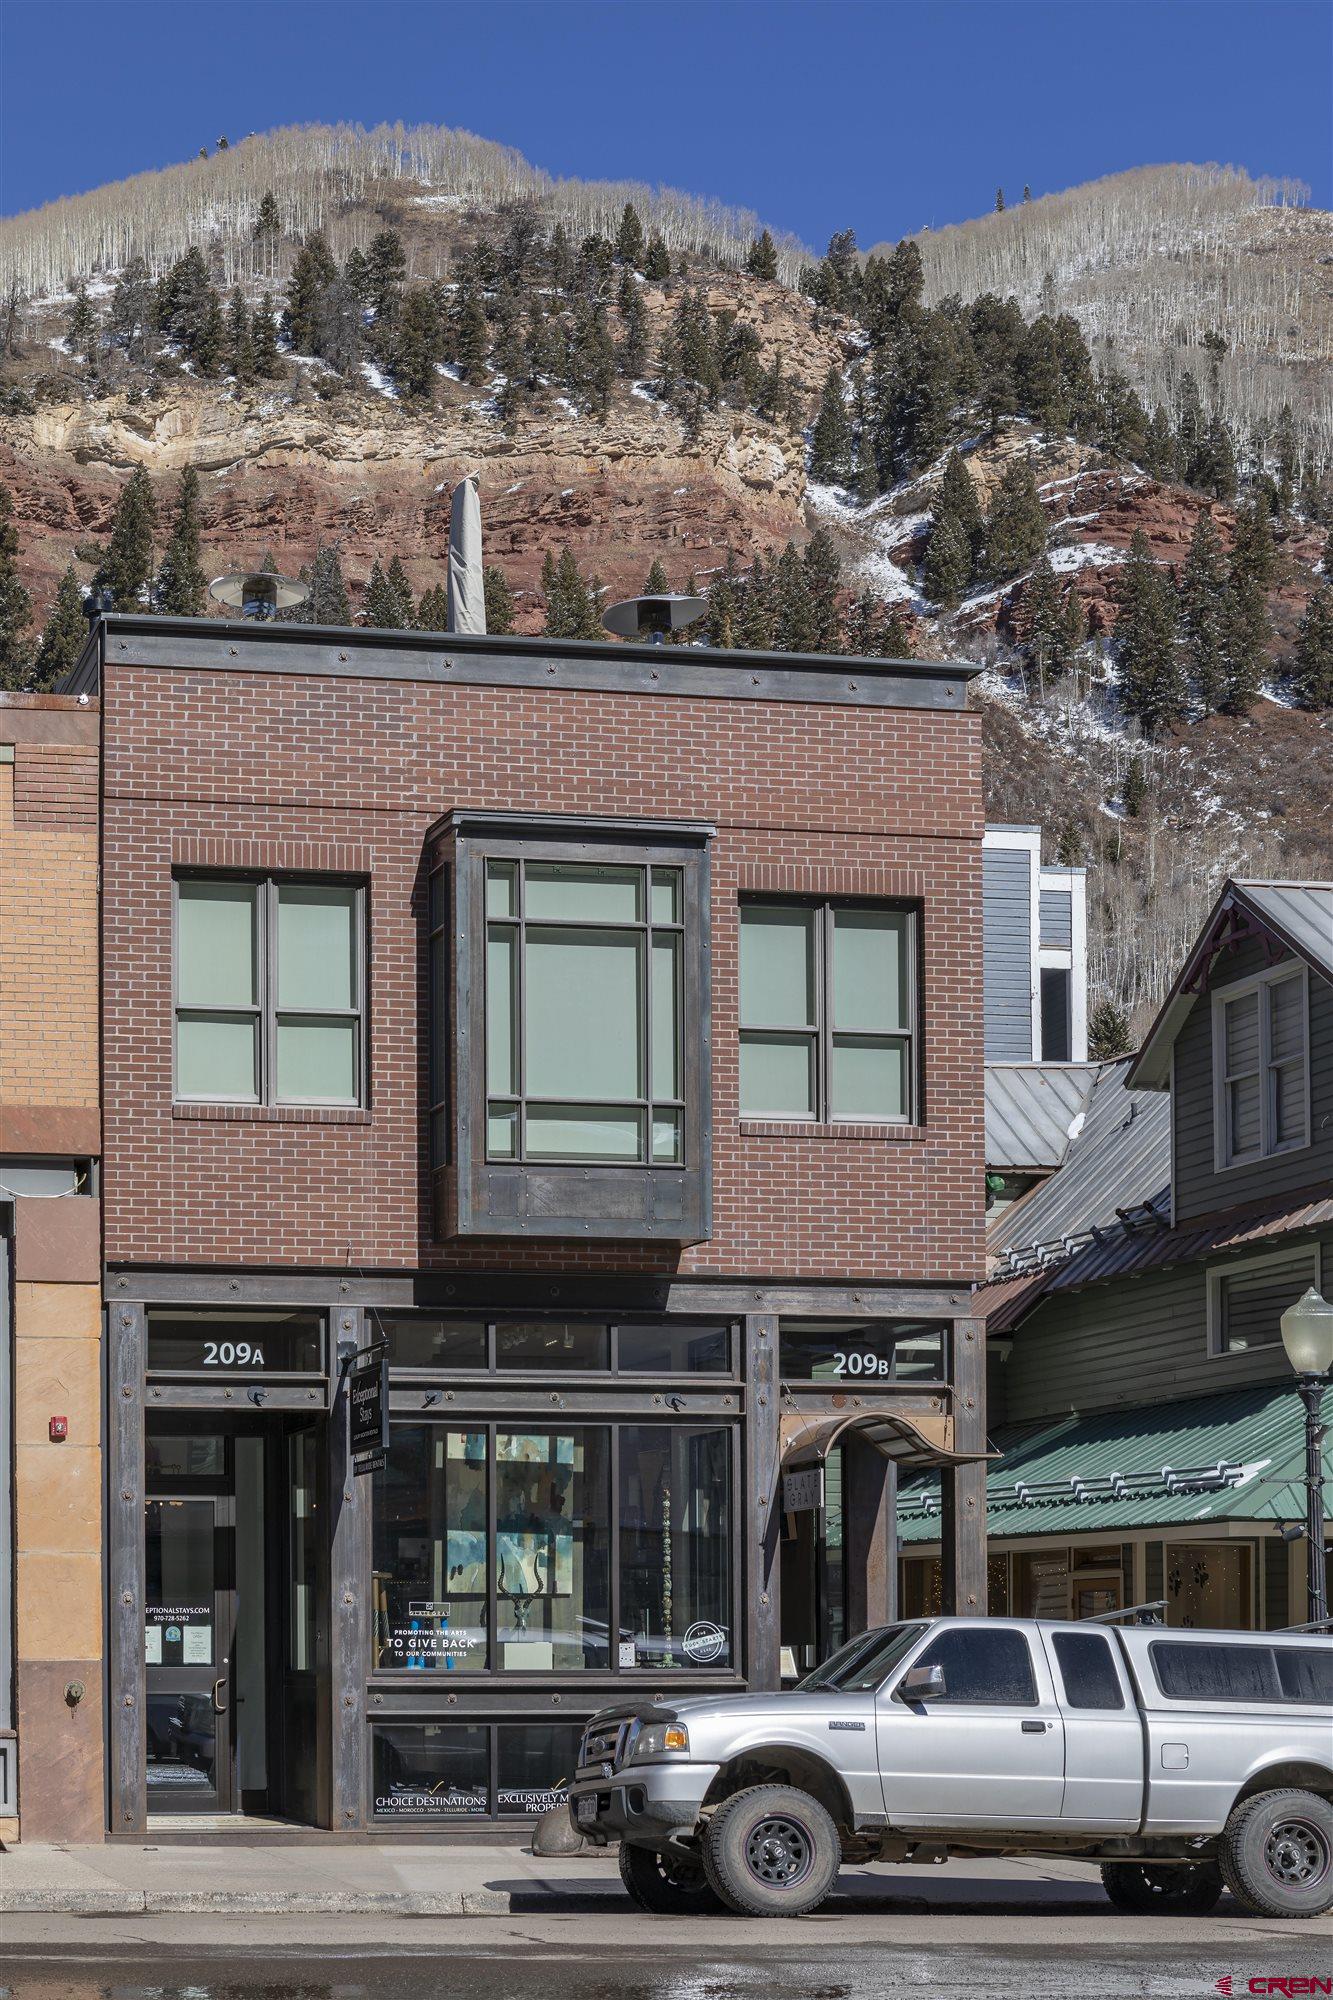 A unique opportunity to own a building on historic Colorado Ave in downtown Telluride Colorado. This 4 unit building constructed within the last 10 years has 360 views from the large patio of the 3900 sqft penthouse condo. Experience the incredible views of of Bear Creek, the box canyon, Telluride Ski Resort, and the Valley Floor. The 4 bedroom luxury 2 story penthouse sits above two high end commercial spaces with solid rental history and great tenants. The building is in the ultimate location for the Telluride downtown area and is complimented with 4 parking spots for added convenience .